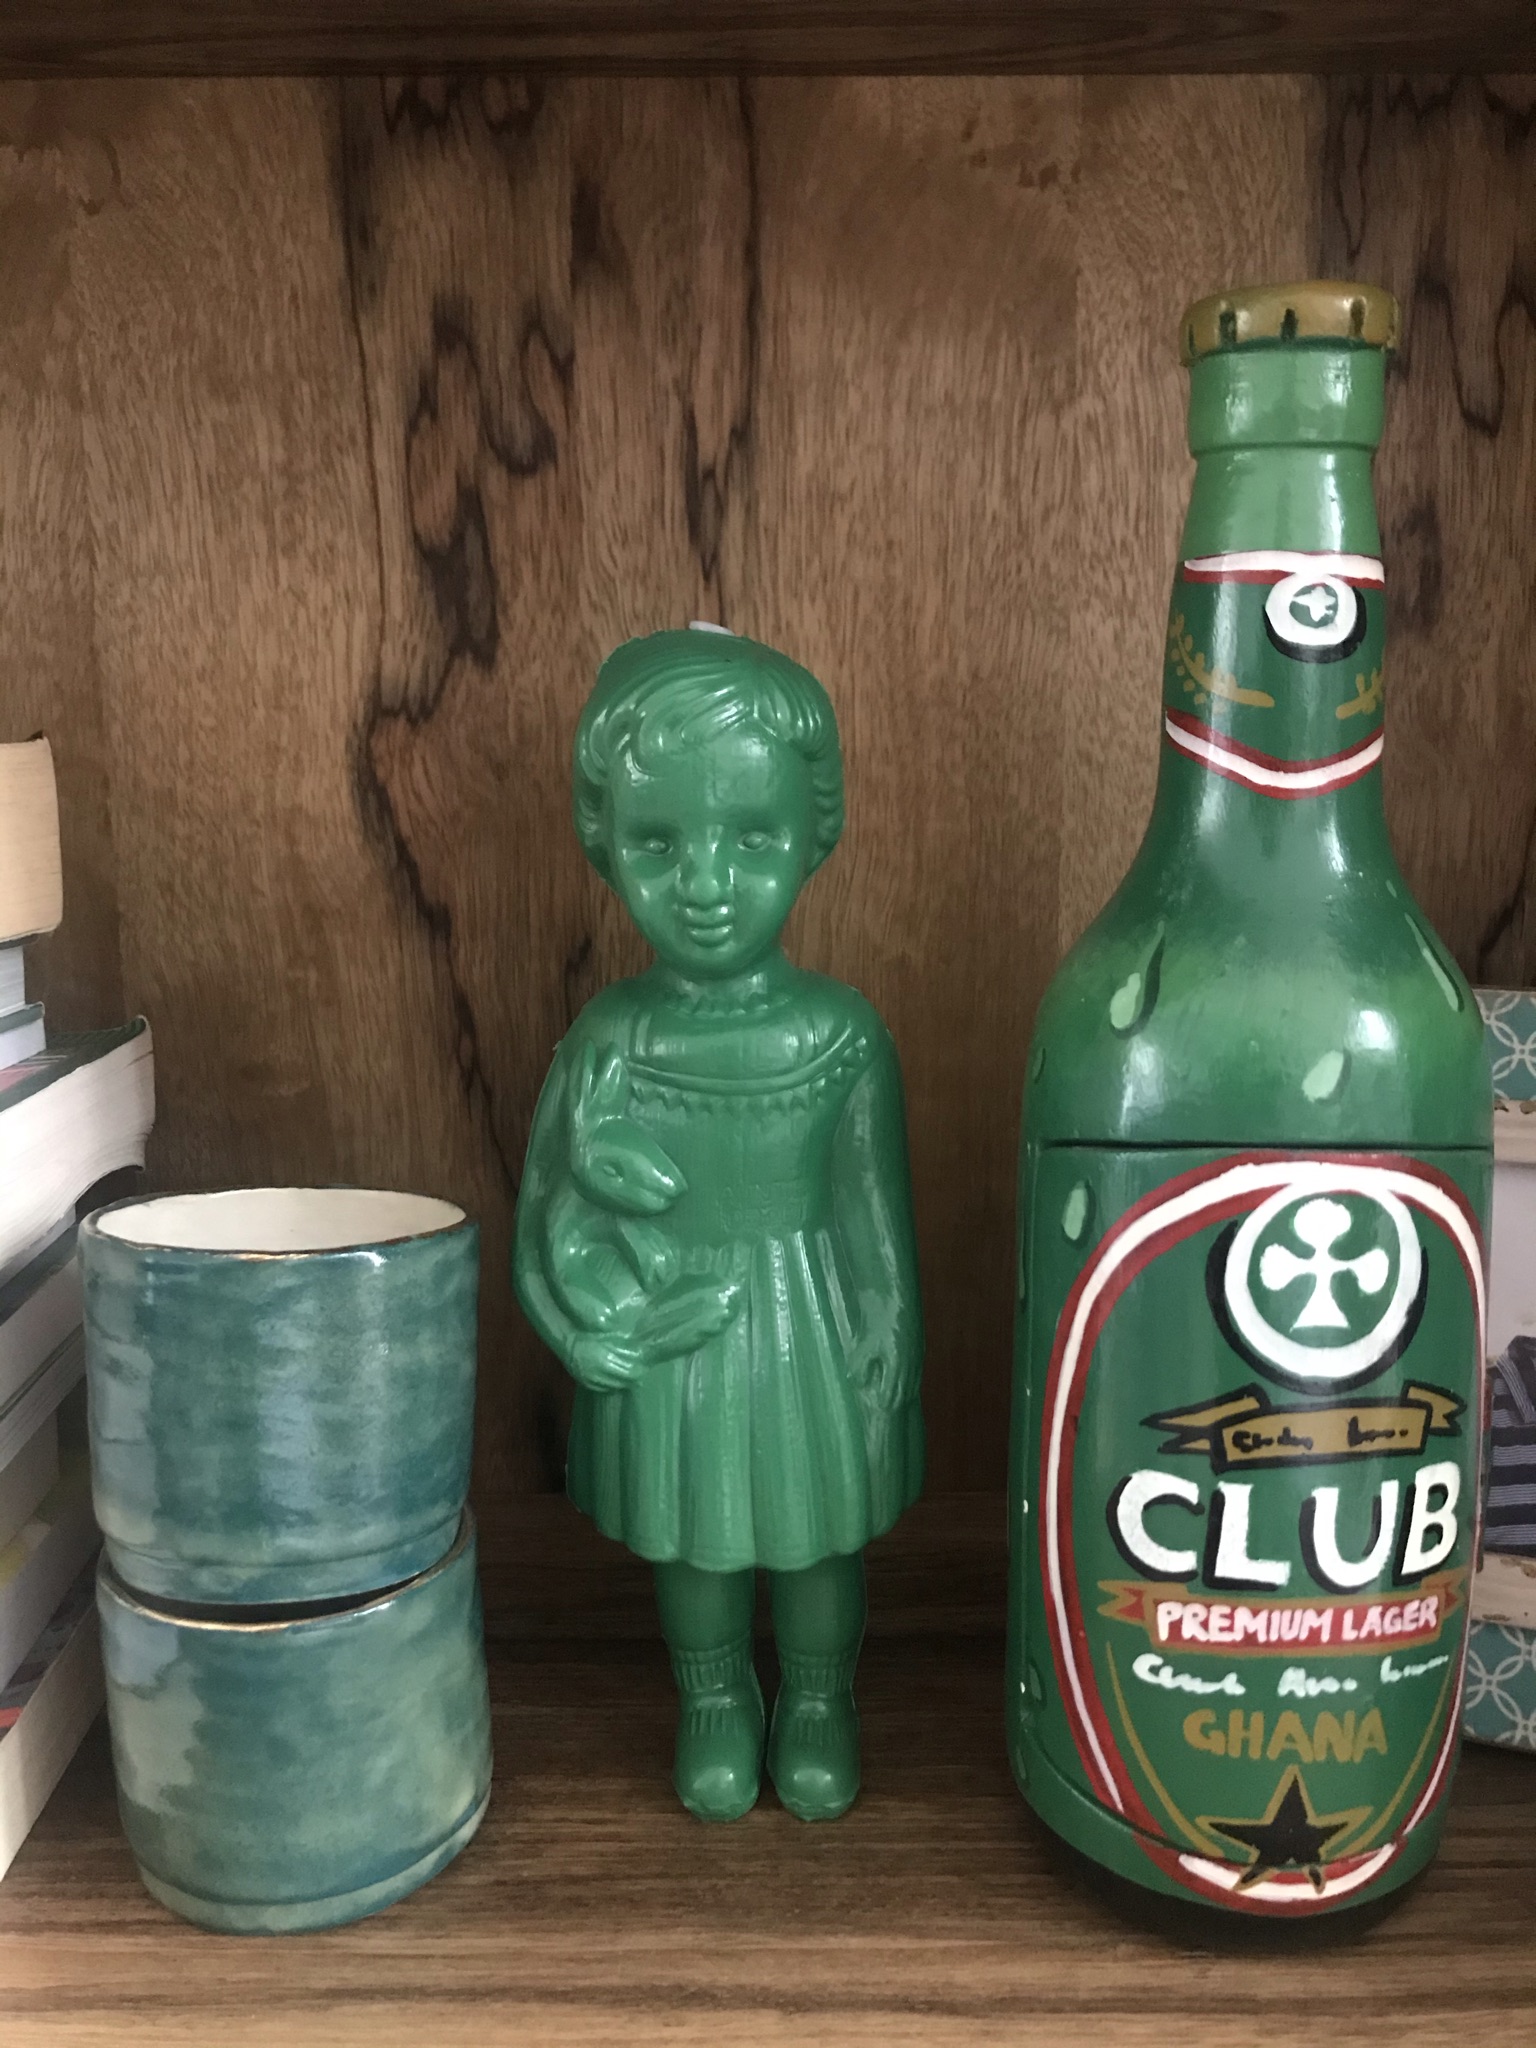 A green plastic Clonette Doll stands on our bookshelf next to a wooden mimic of a Ghanaian fantasy coffin in the shape of a Club beer bottle.